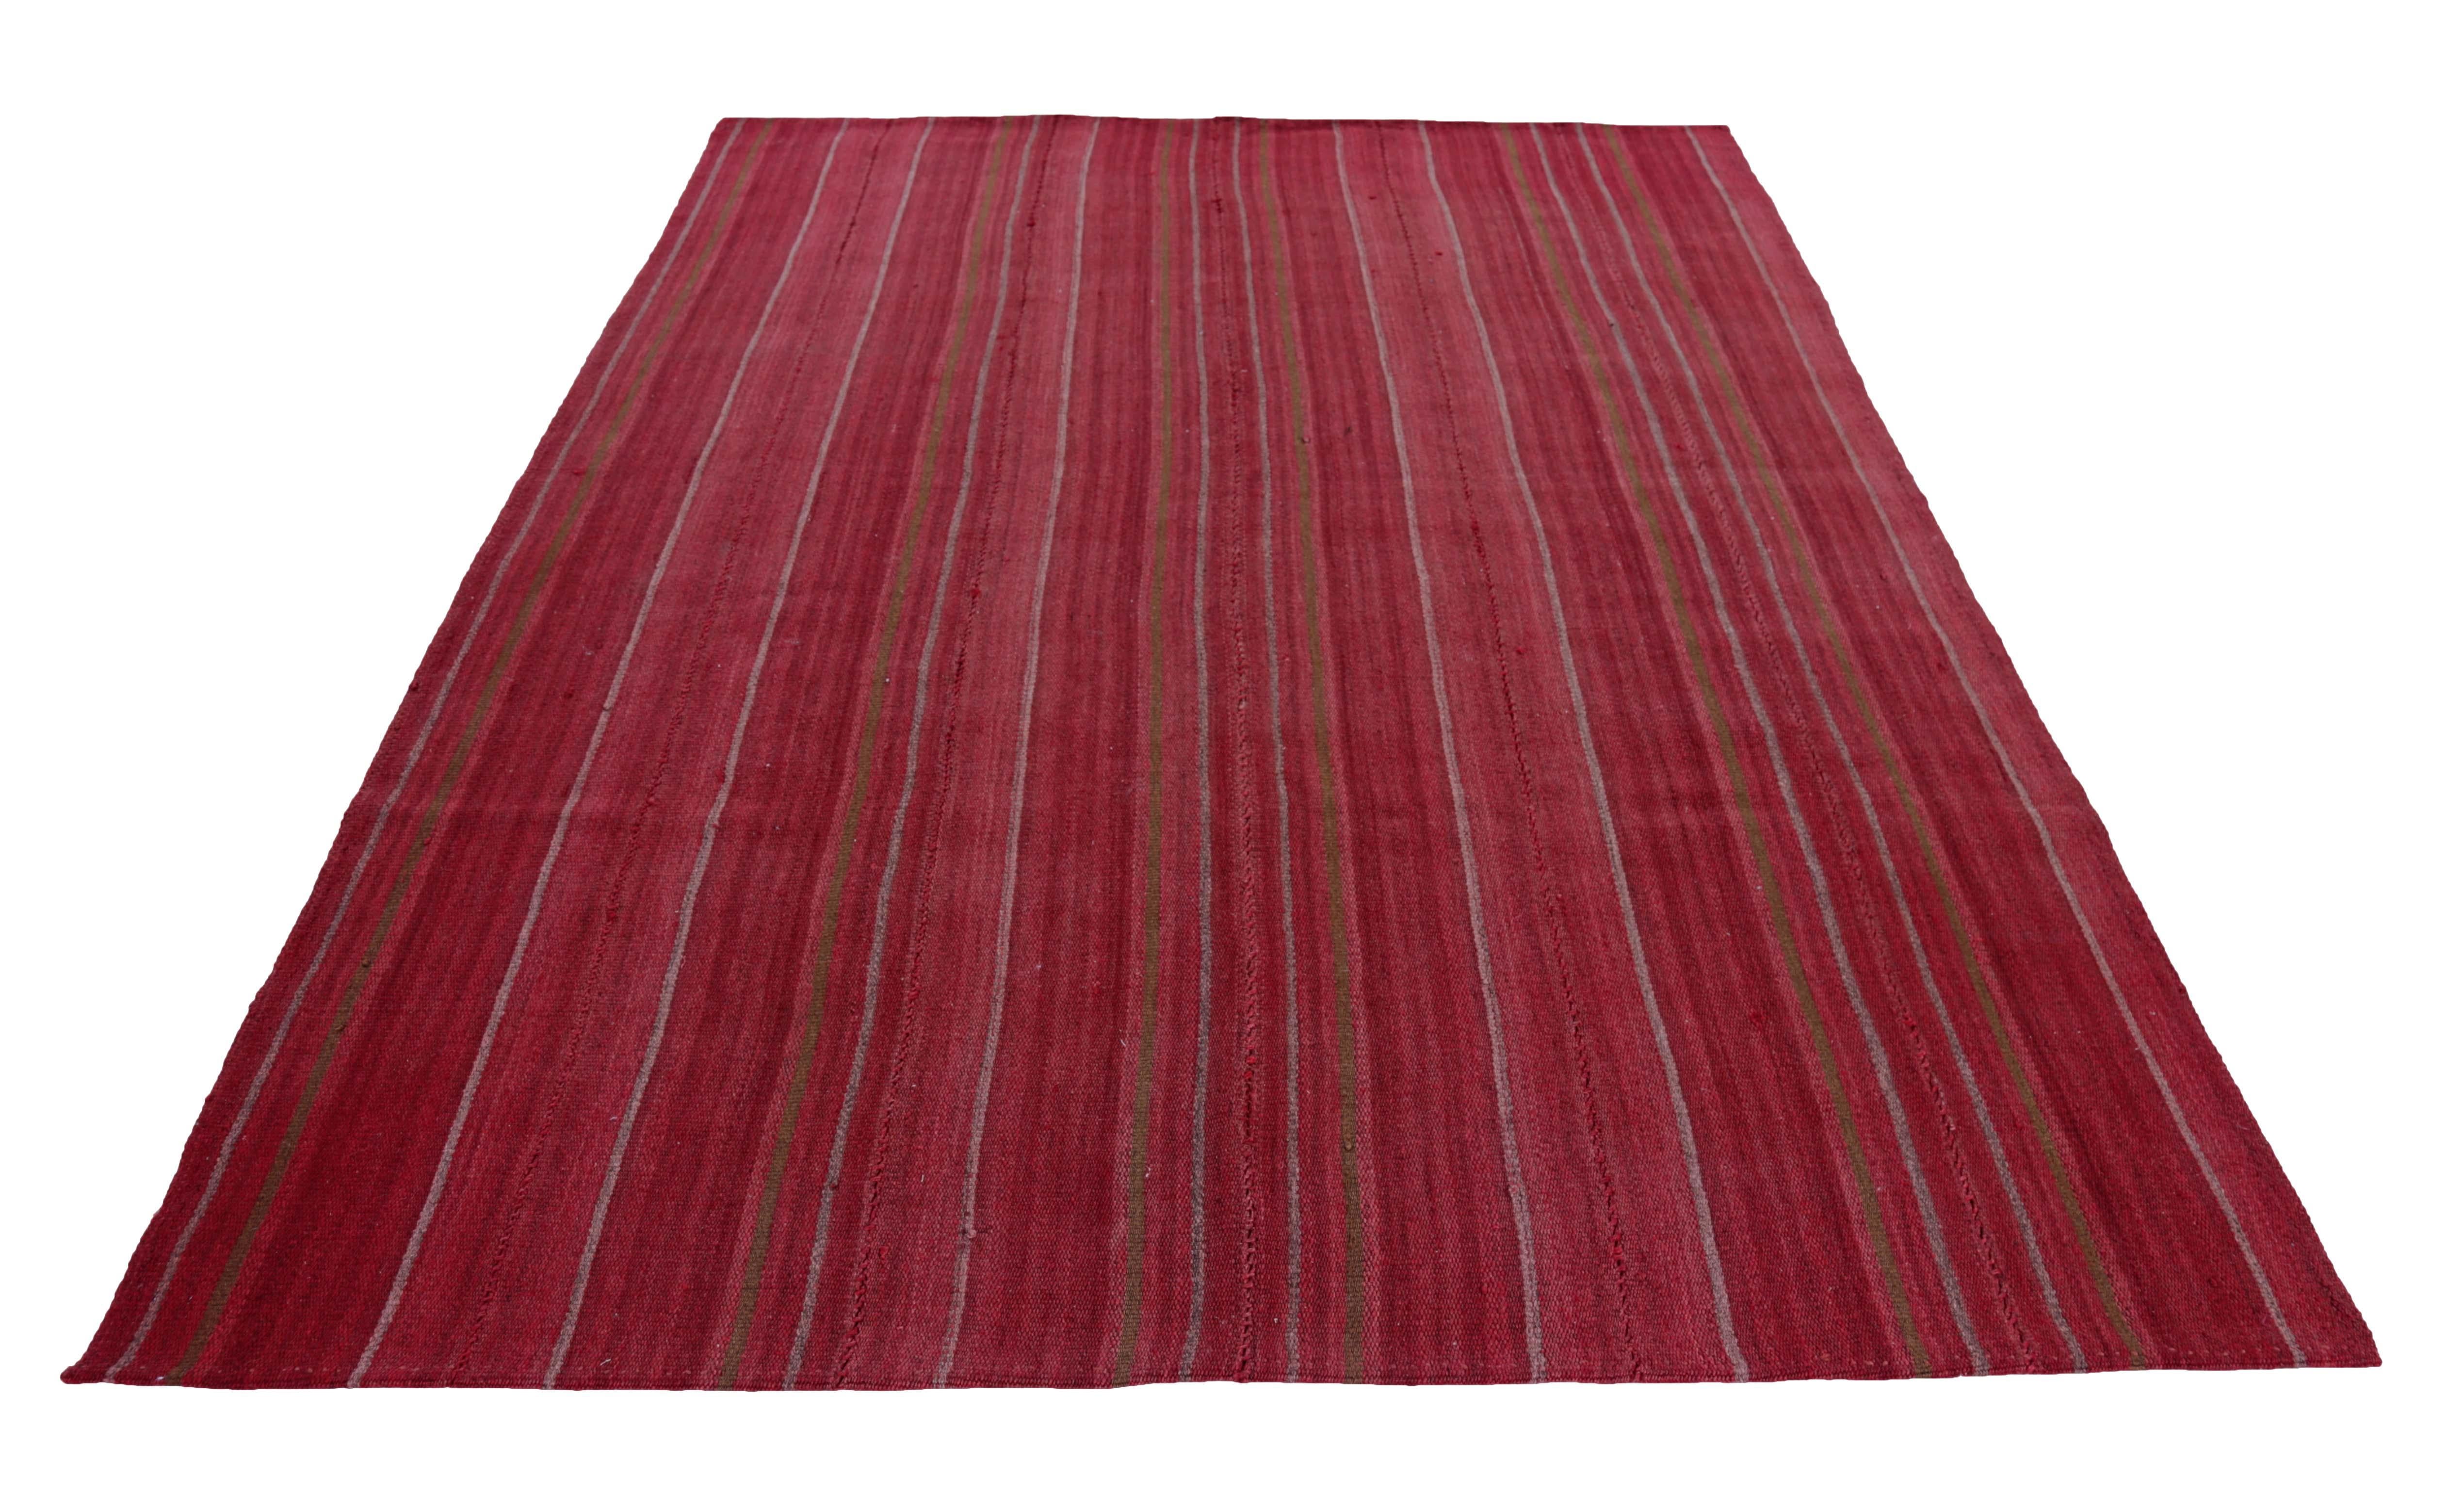 Modern Turkish rug handwoven from the finest sheep’s wool and colored with all-natural vegetable dyes that are safe for humans and pets. It’s a traditional Kilim flat-weave design featuring a red field with ivory and brown pencil stripes. It’s a